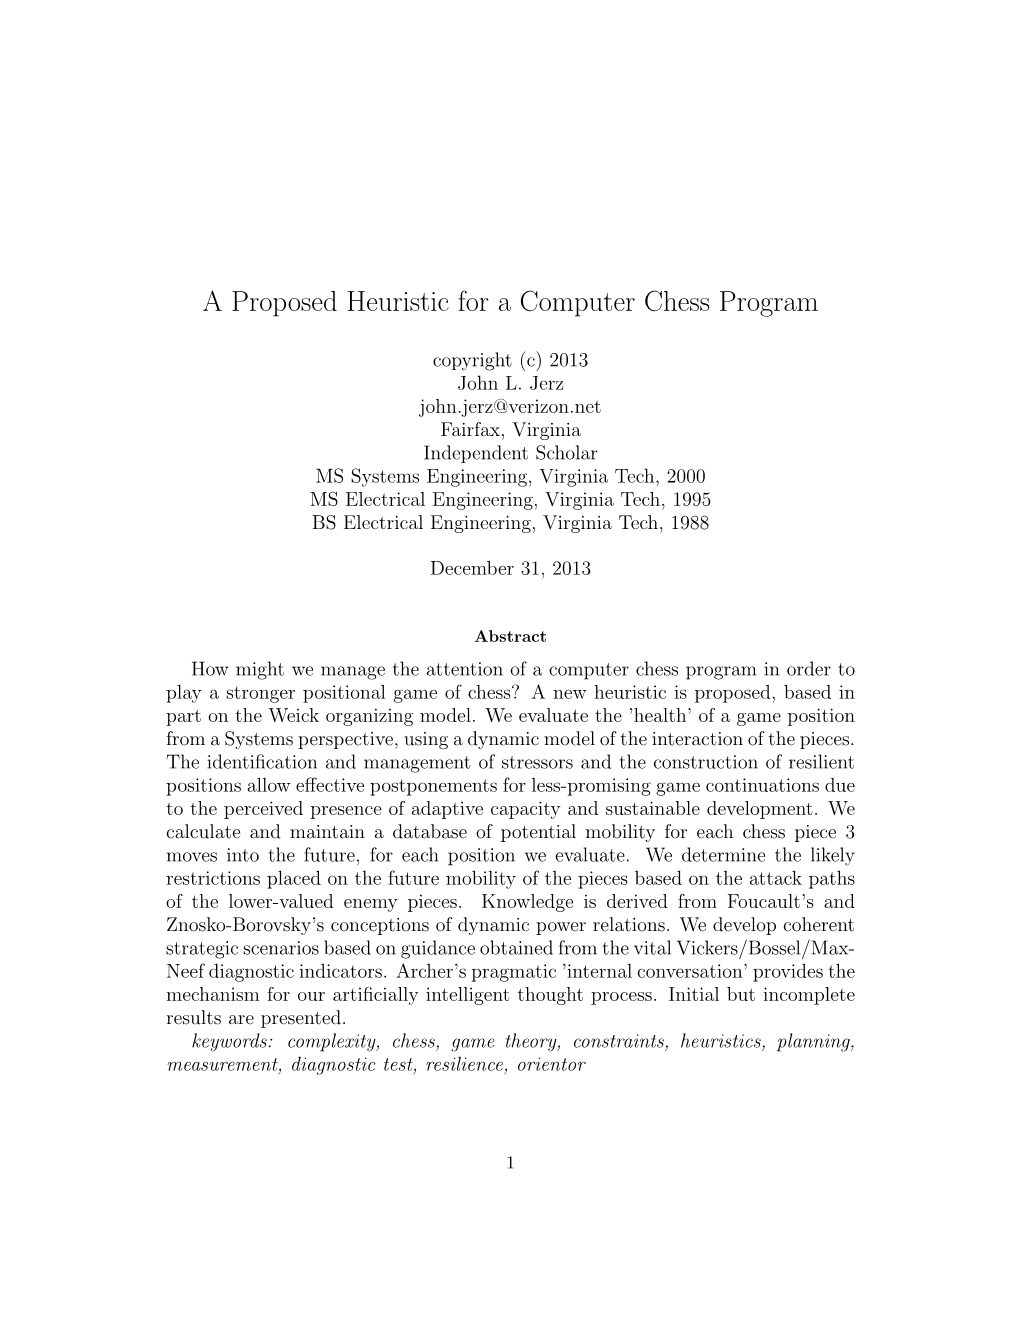 A Proposed Heuristic for a Computer Chess Program